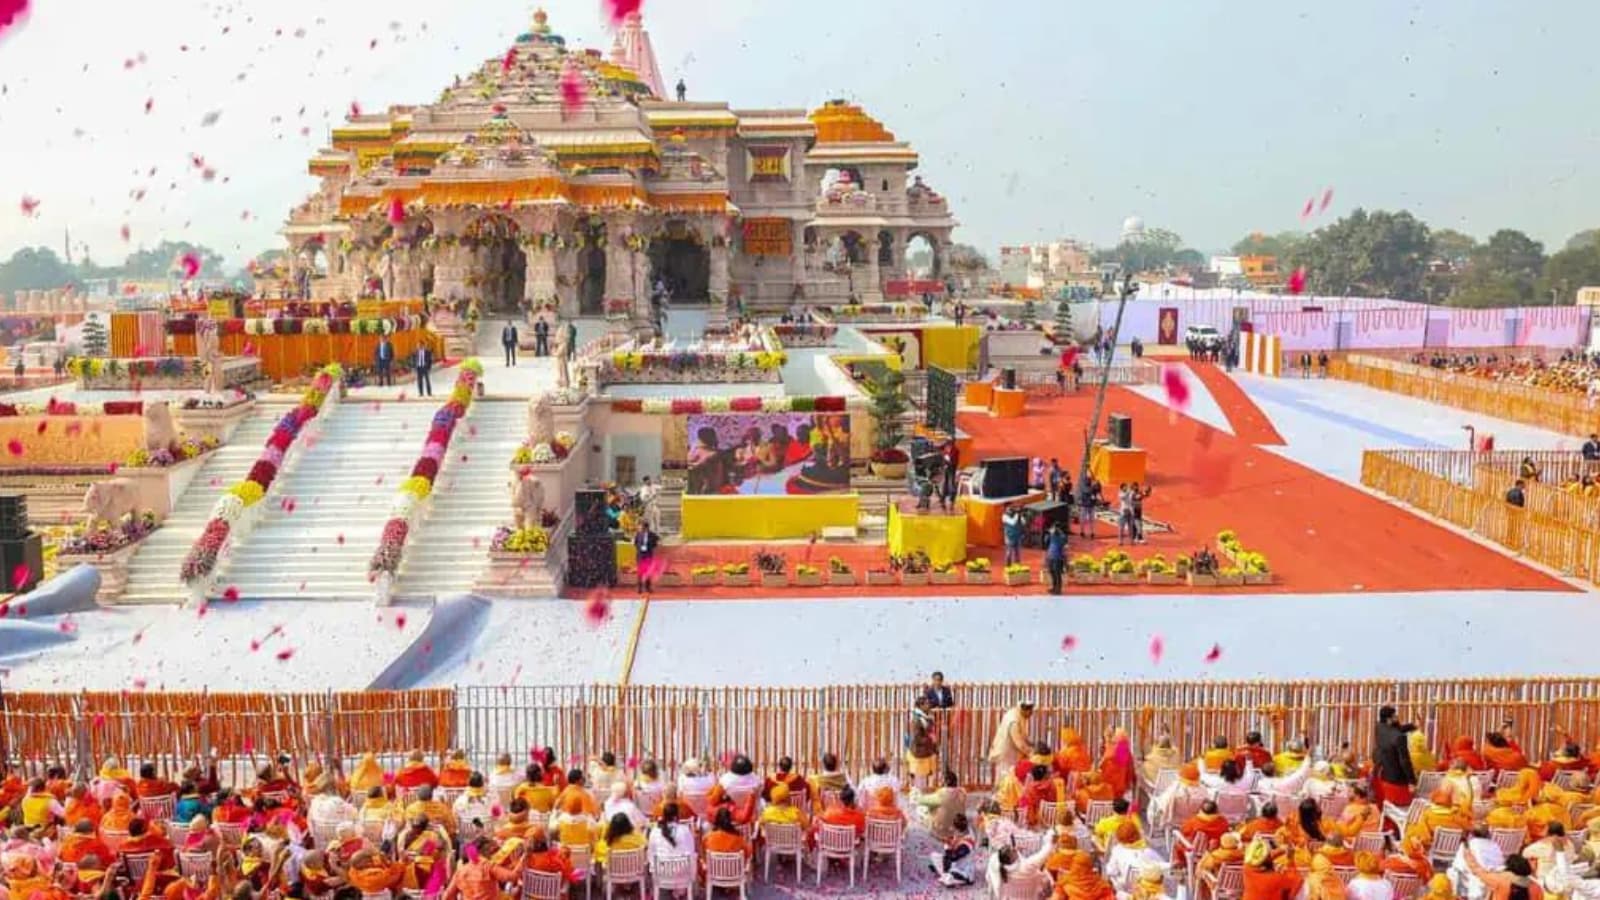 Ram Mandir Boosts Uttar Pradesh Tourism Expected Rs 4 Lakh Crore in Expenditure by 2025